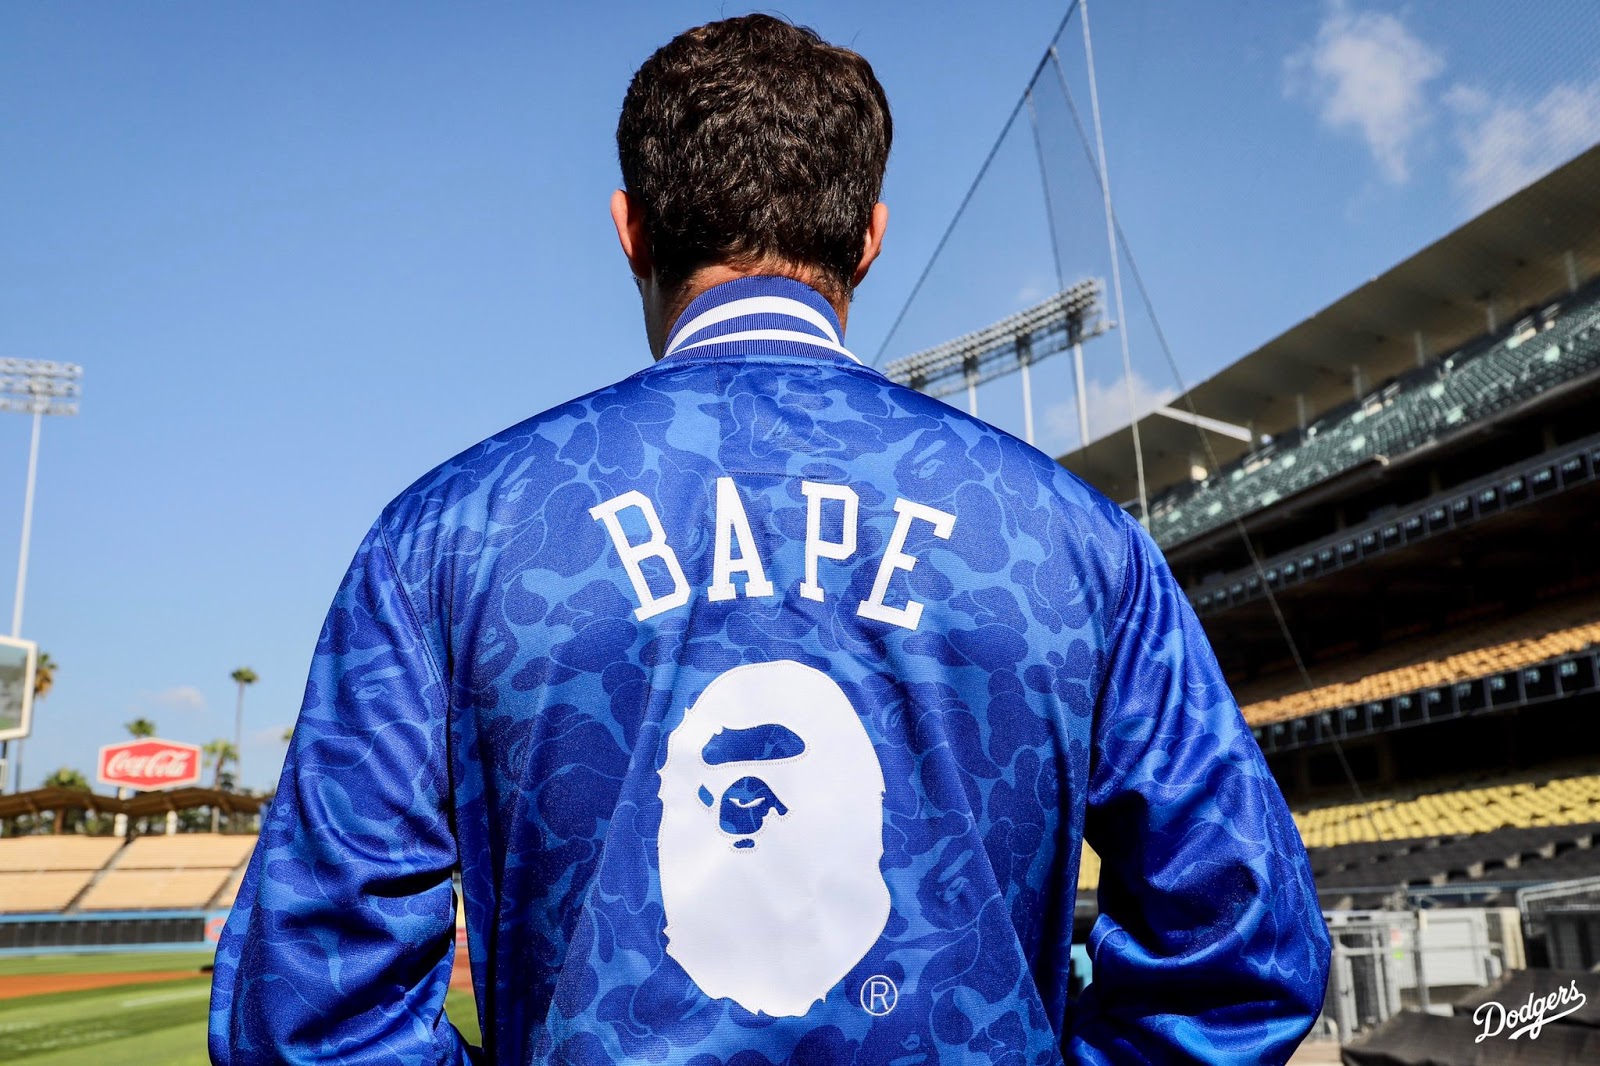 bape x mitchell and ness dodgers